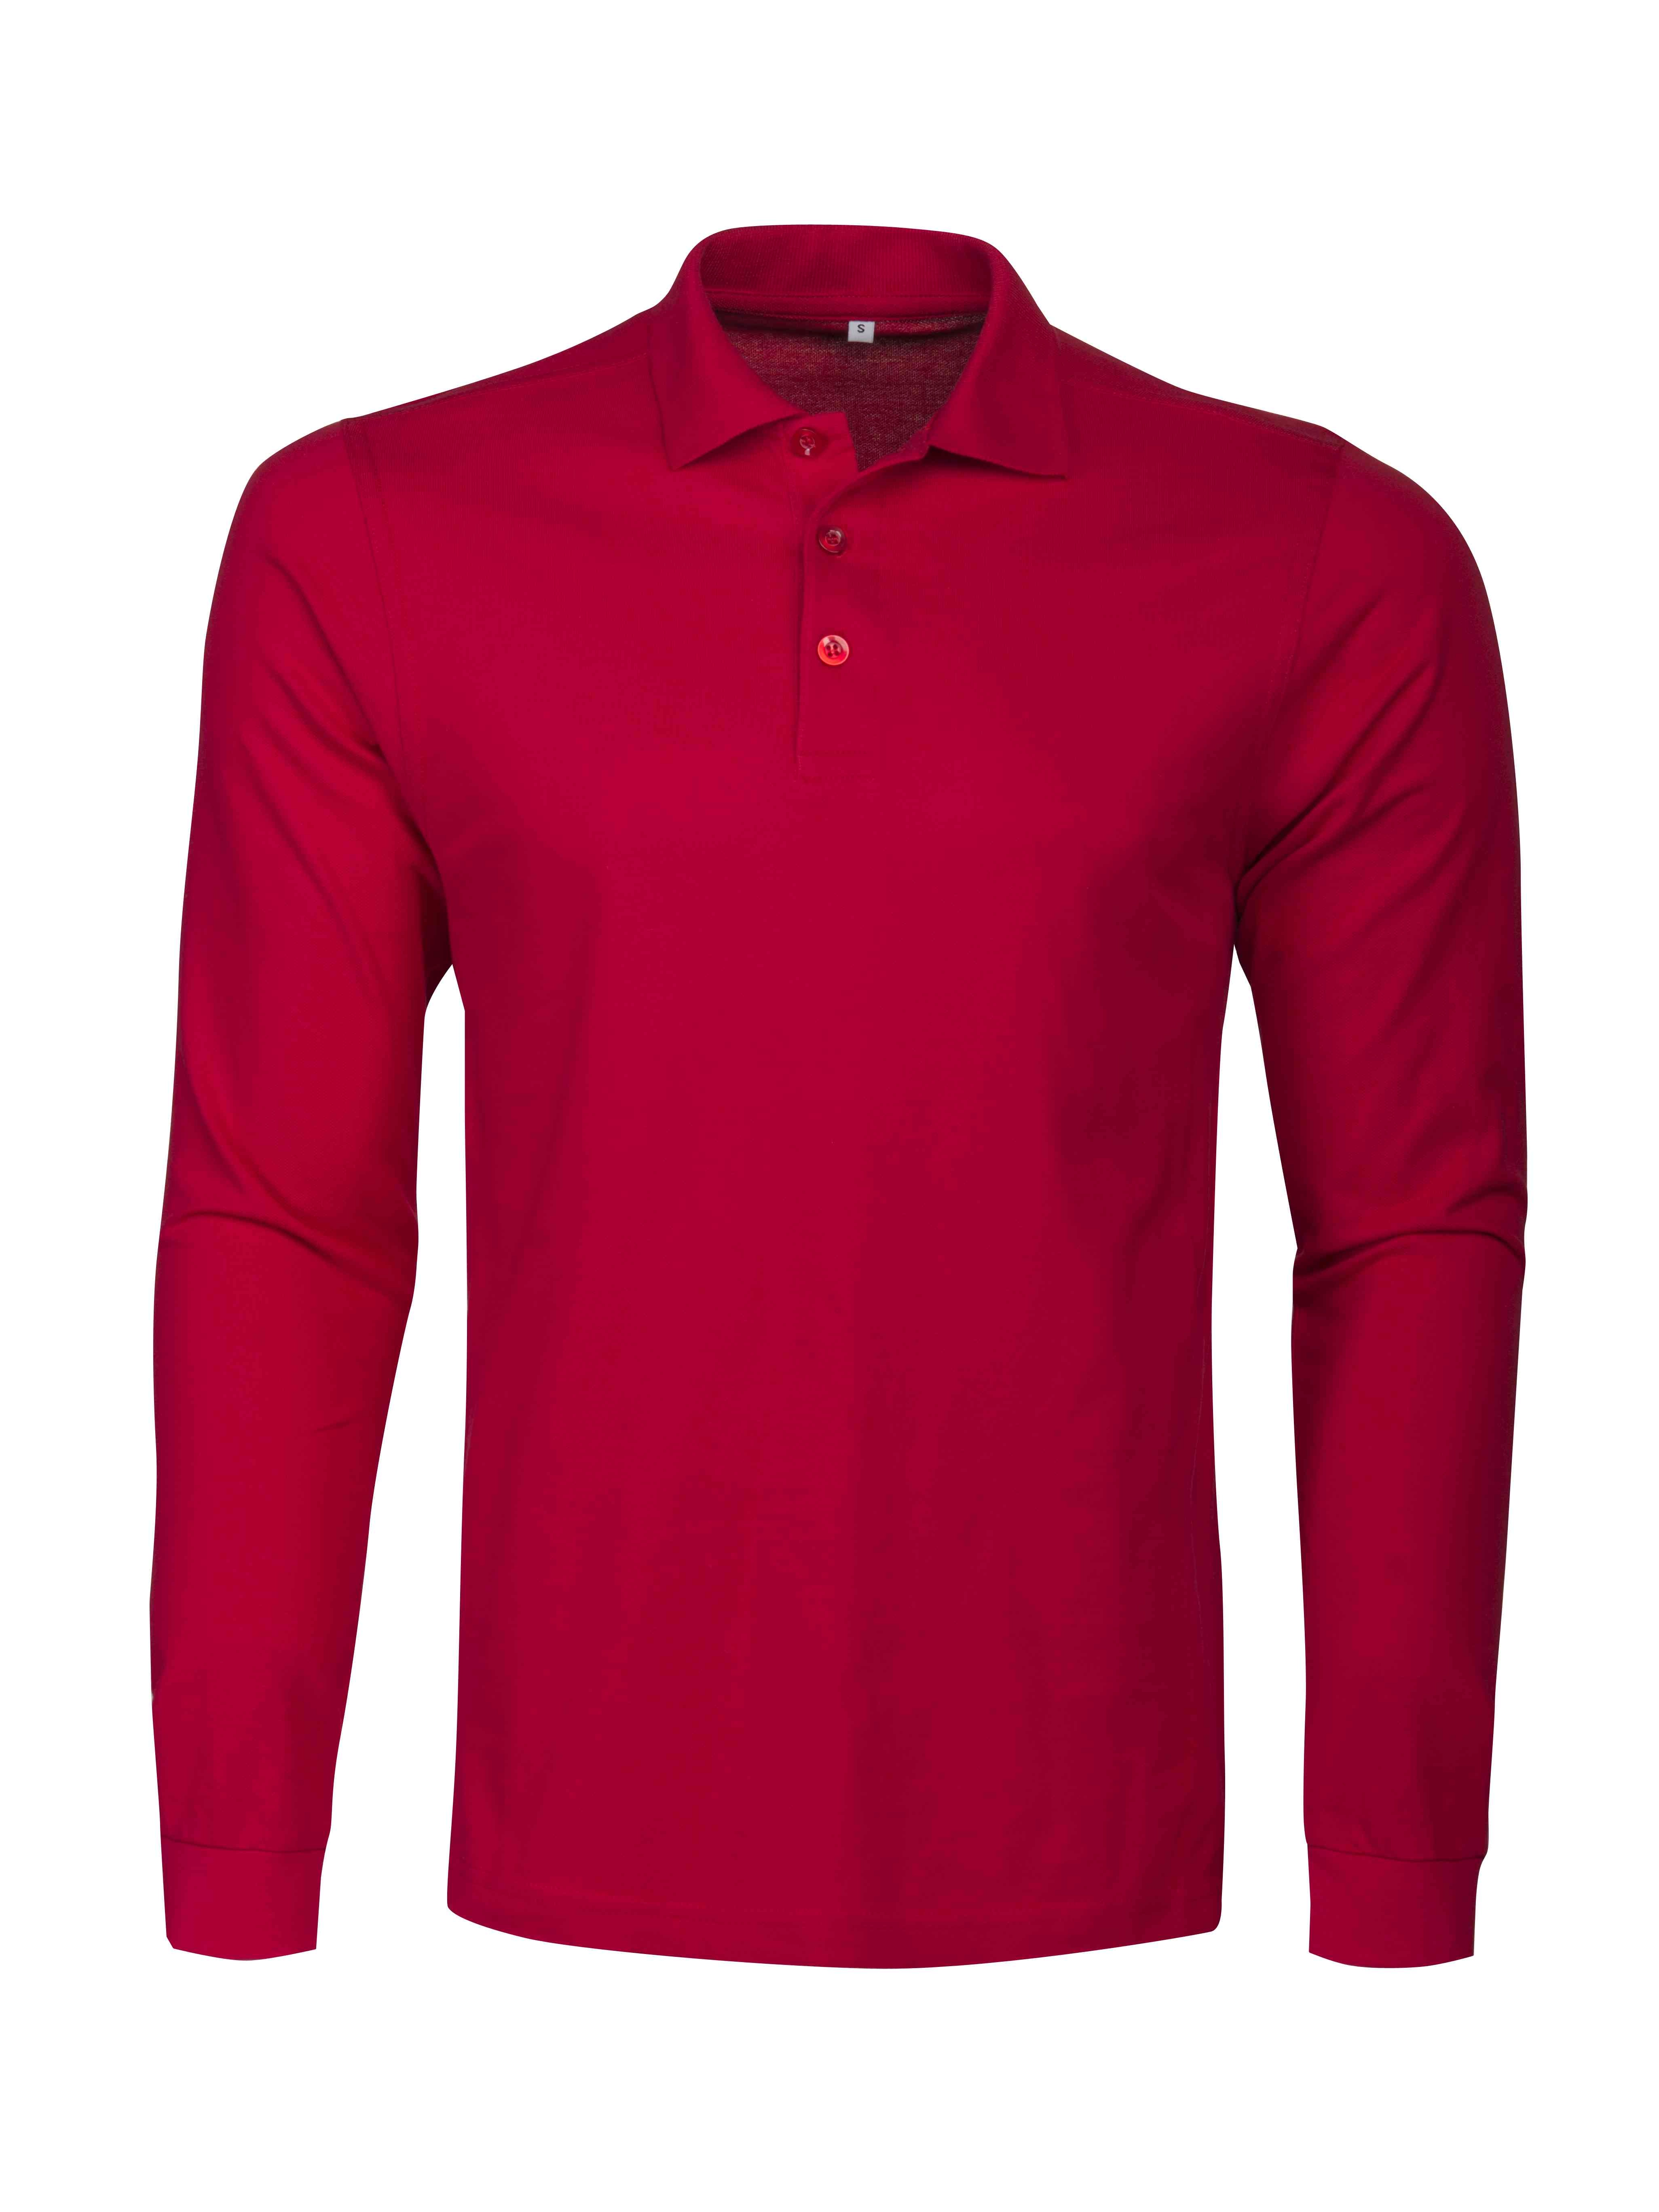 SURF POLO RSX L/S RED PE-2265011-400-9